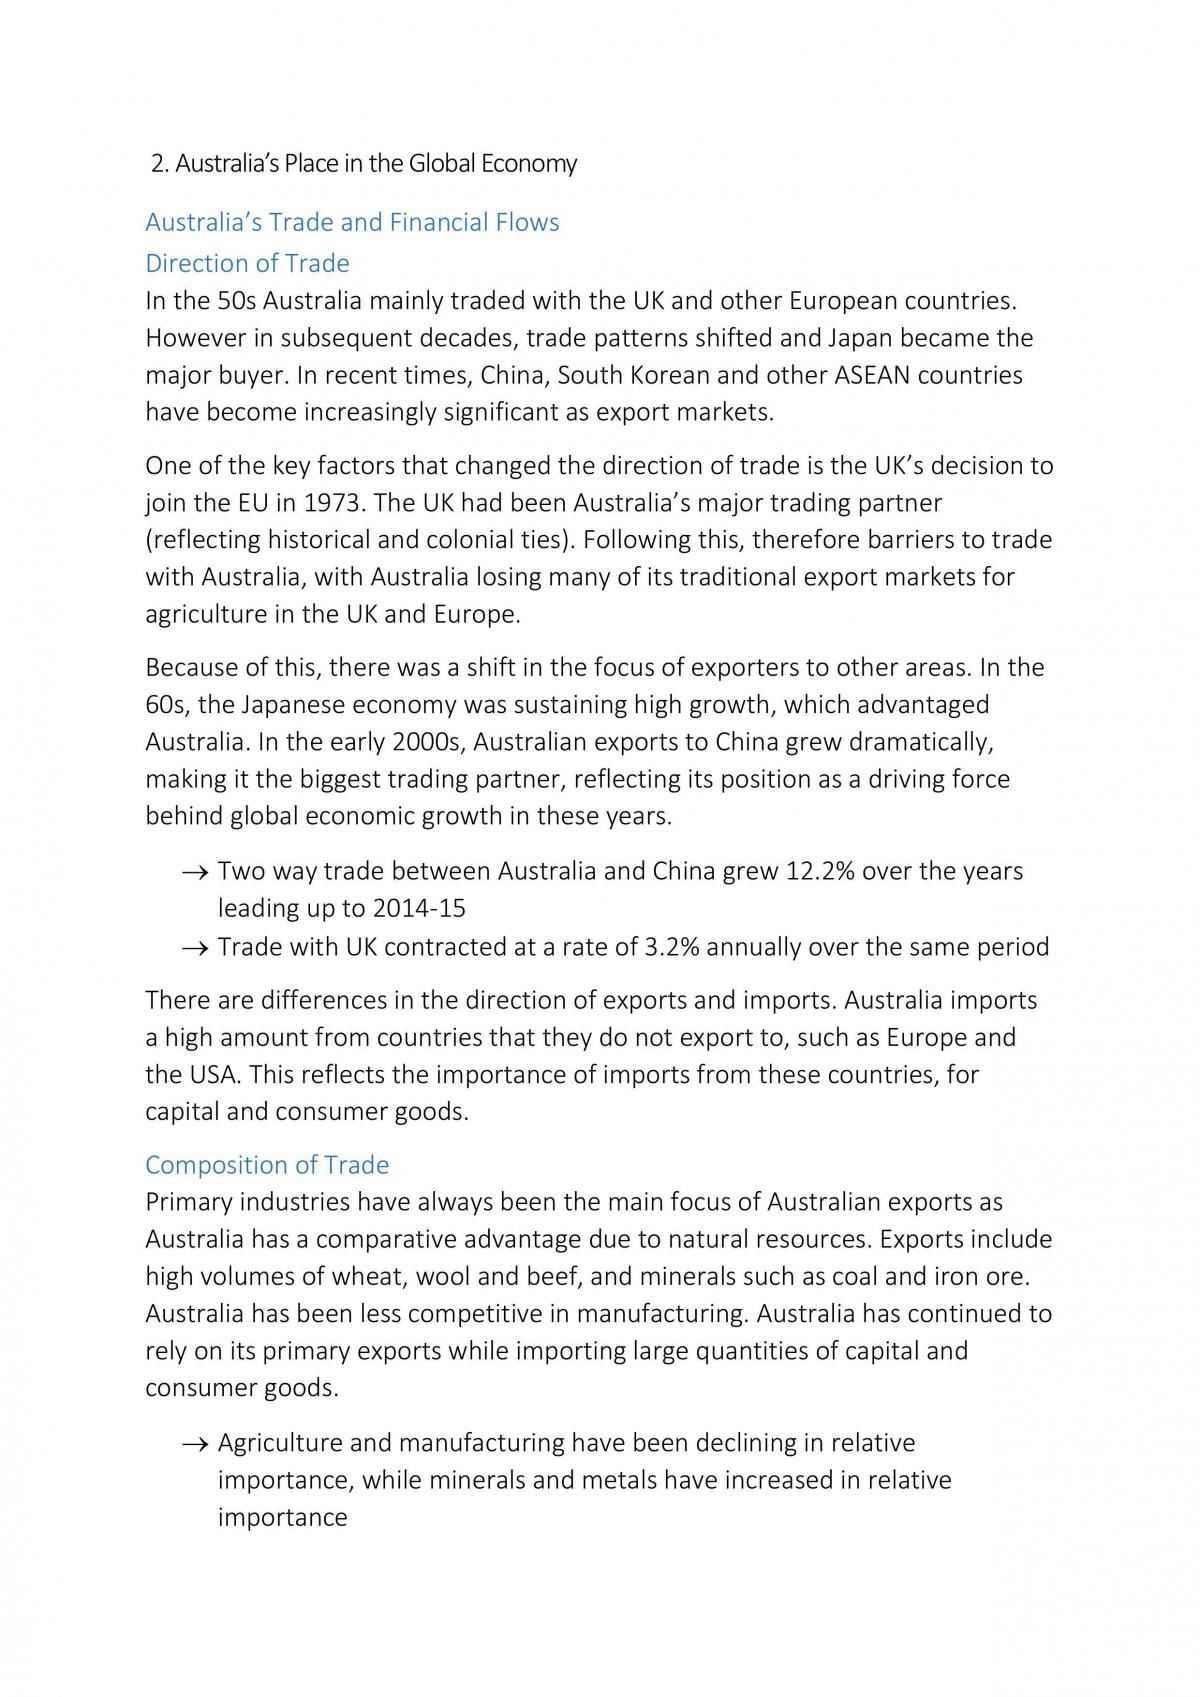 2. Australia’s Place in the Global Economy - Page 1